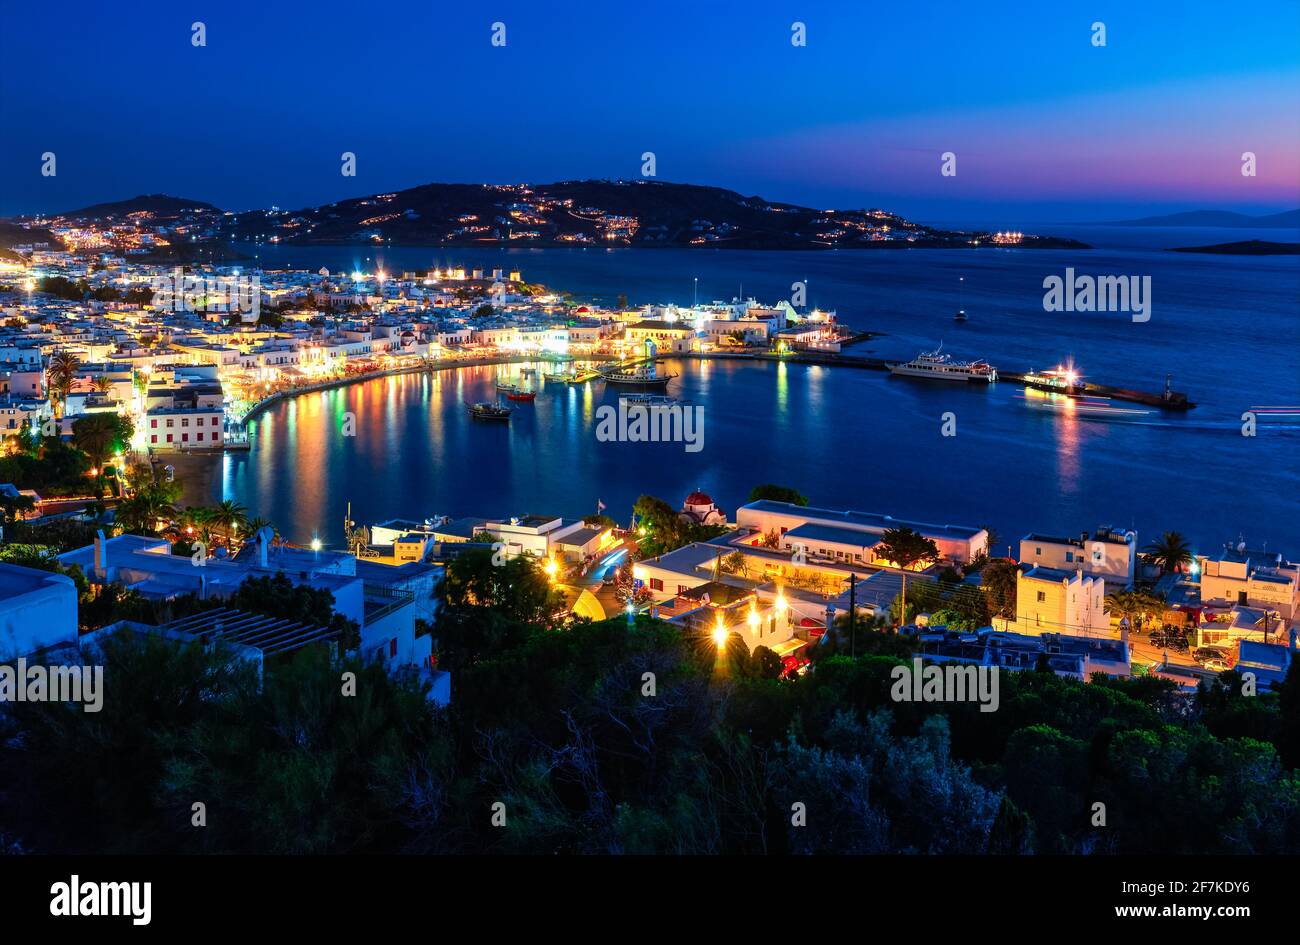 Beautiful night view of Mykonos, Greece, ships, port, whitewashed houses. Town lights up. Vacations, leisure, nightlife, Mediterranean lifestyle Stock Photo